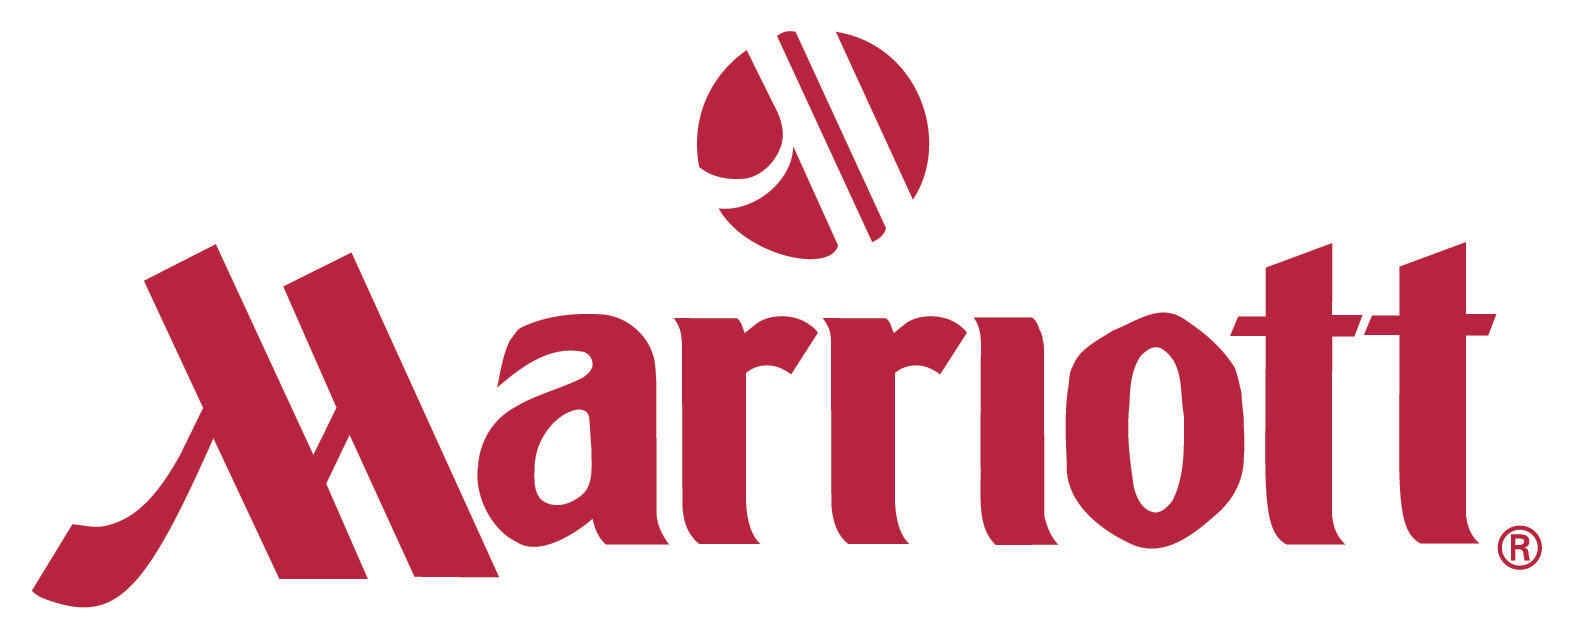 marriott-logo-The hospitality industry is not answering quickly to consumer demand. Free, ubiquitous, one-click and unlimited Wi-Fi in hotel is still a dream. 